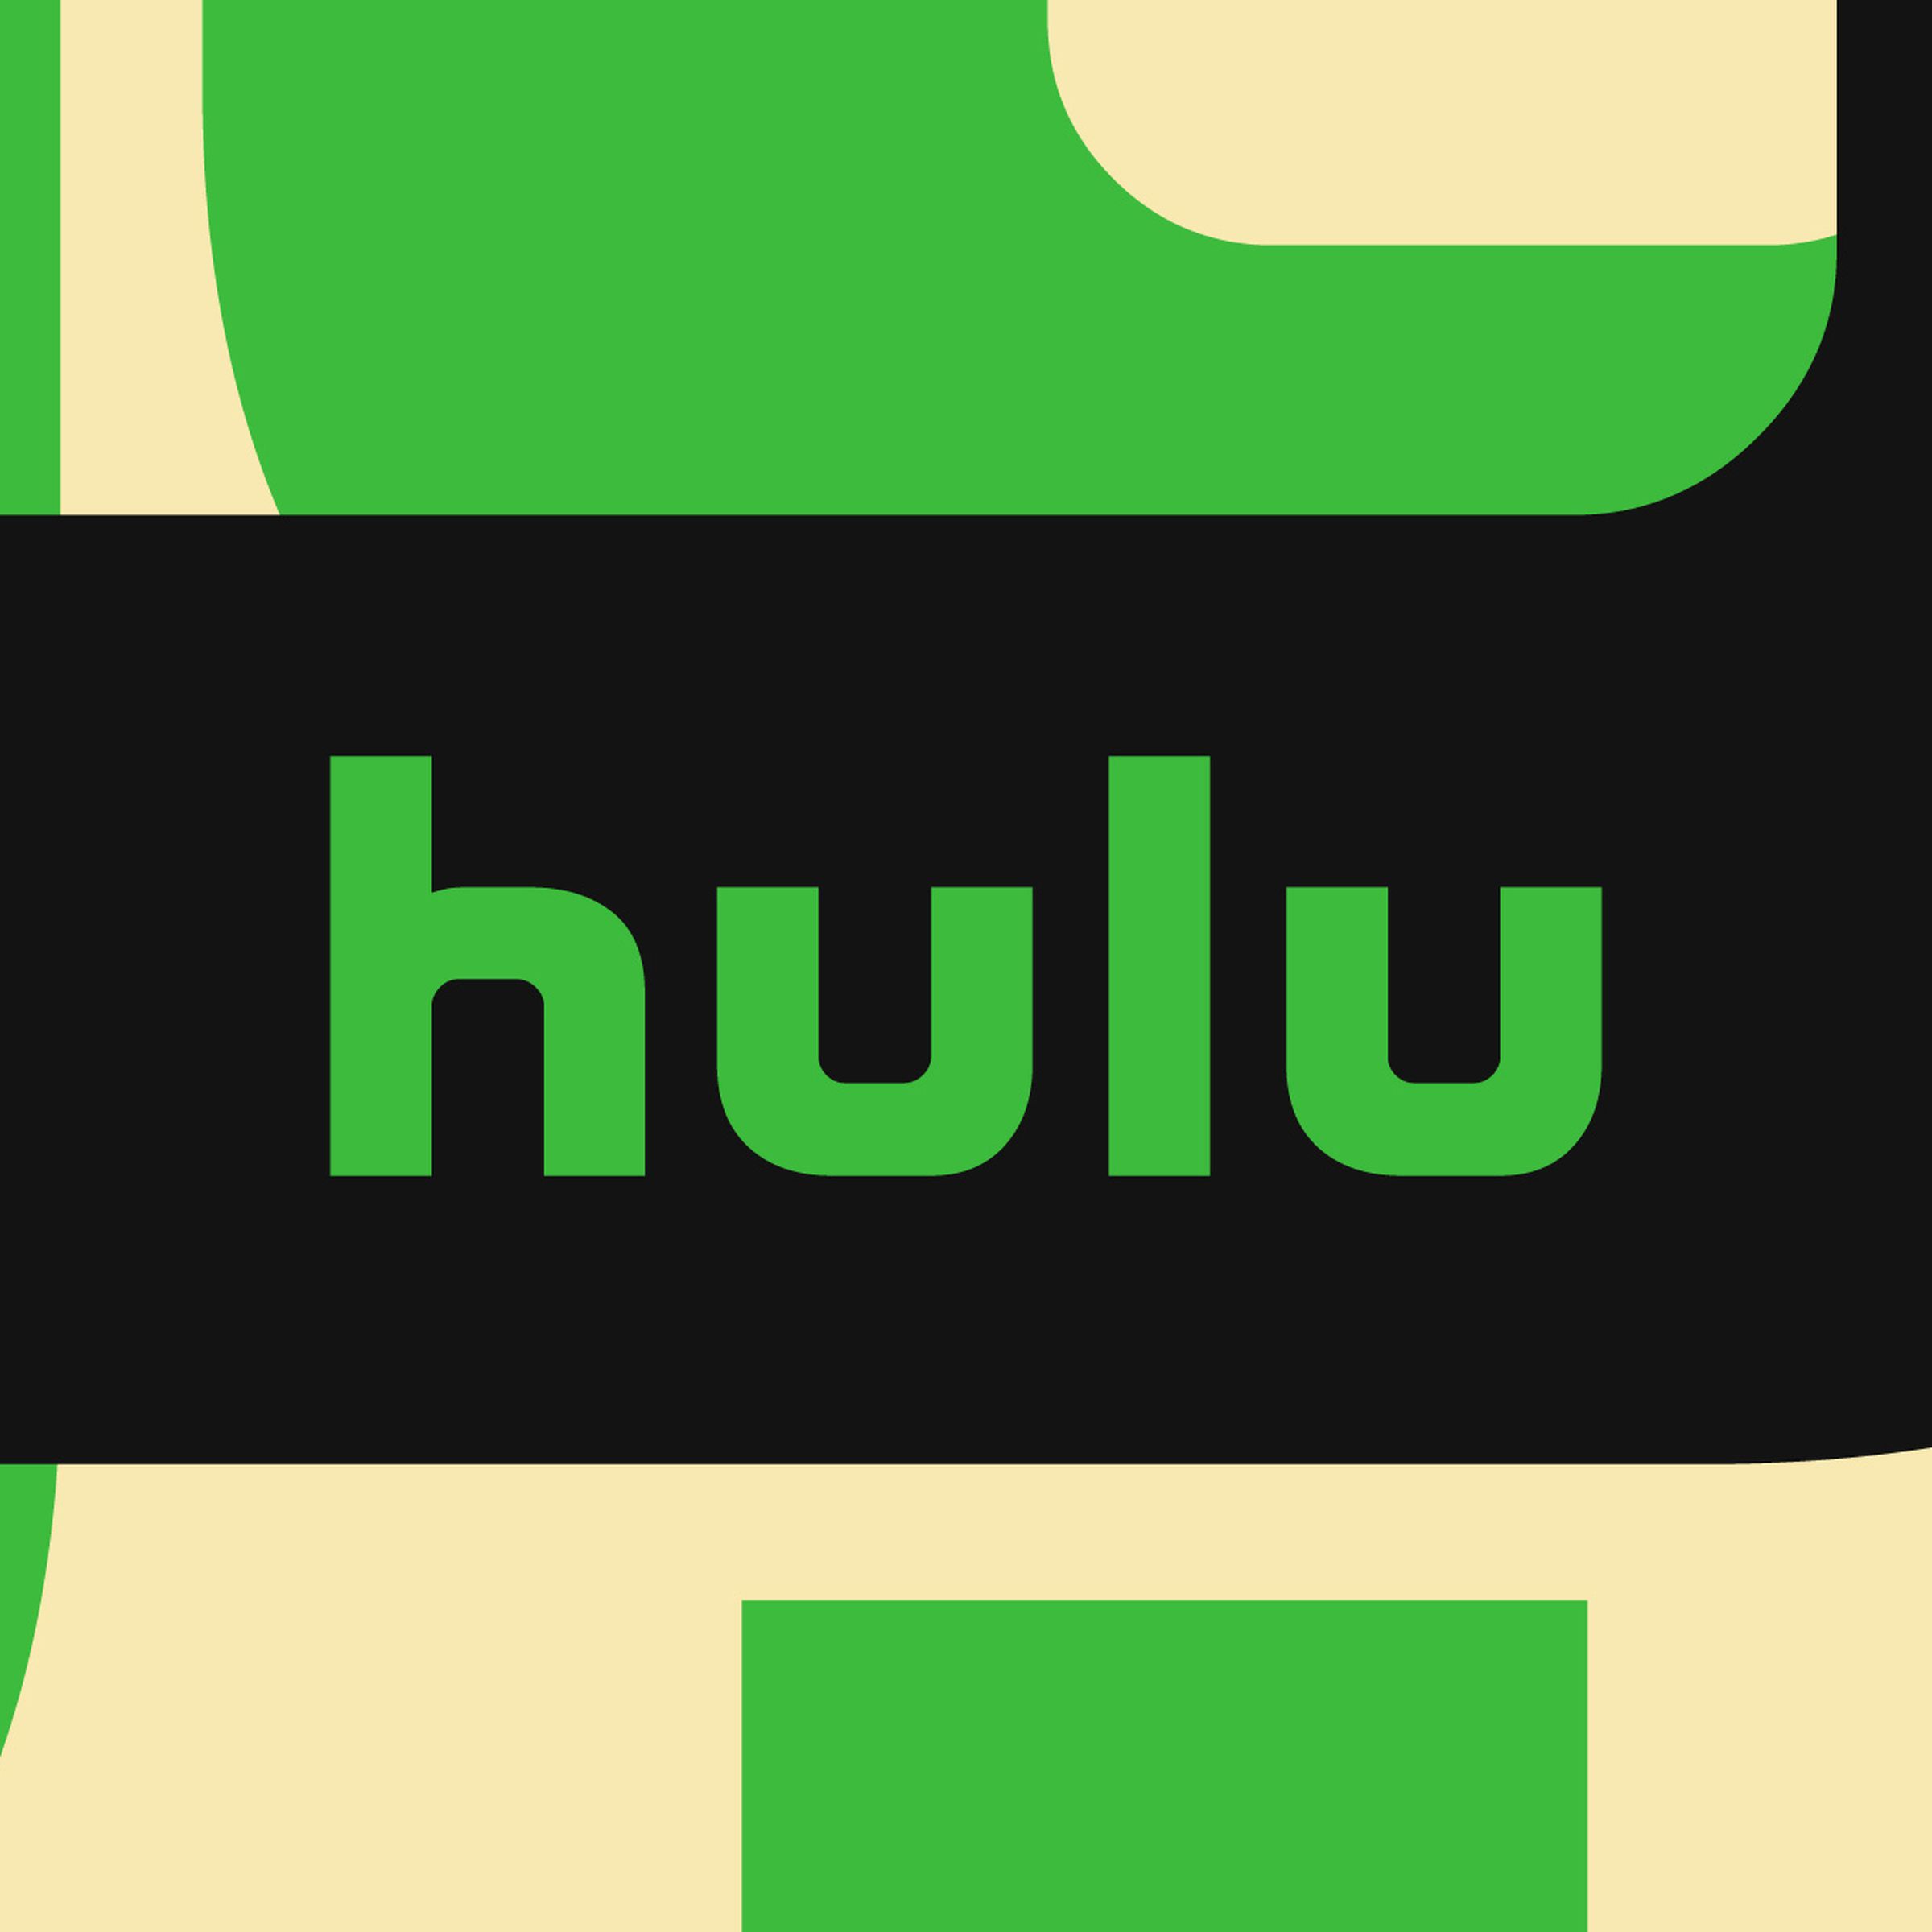 An image showing Hulu’s logo on an abstract background